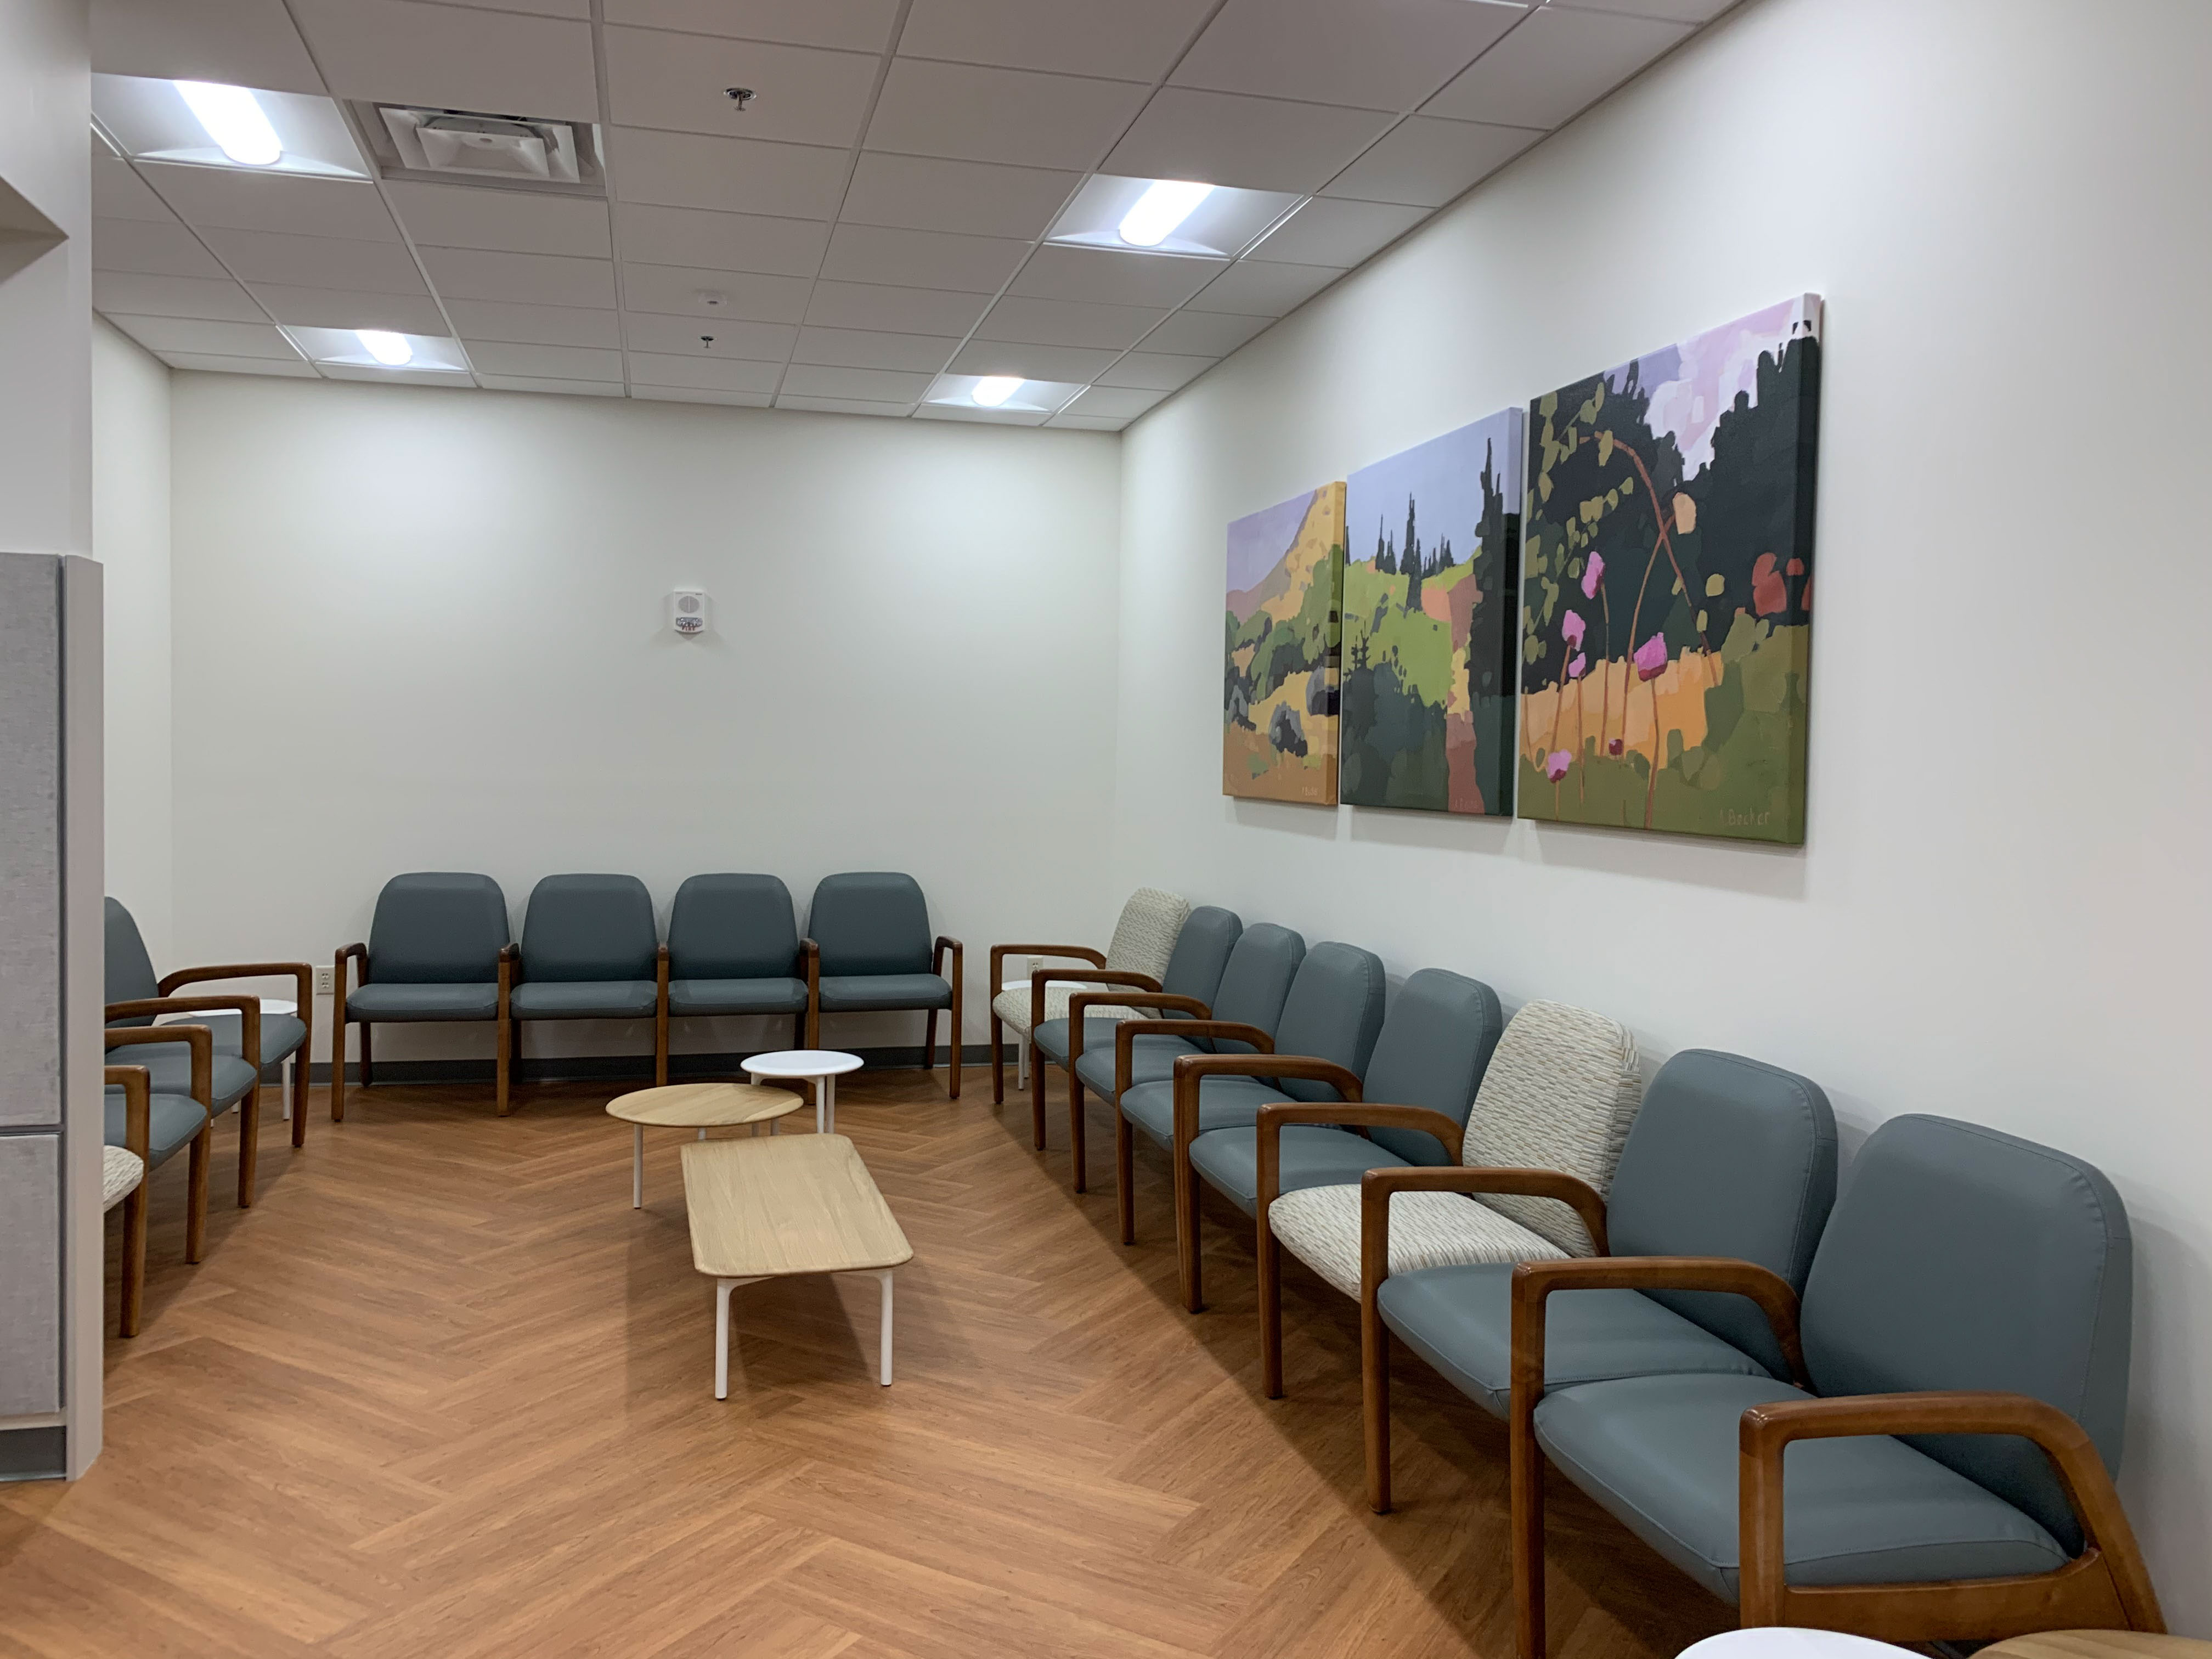 The waiting area of the ASP clinic space.